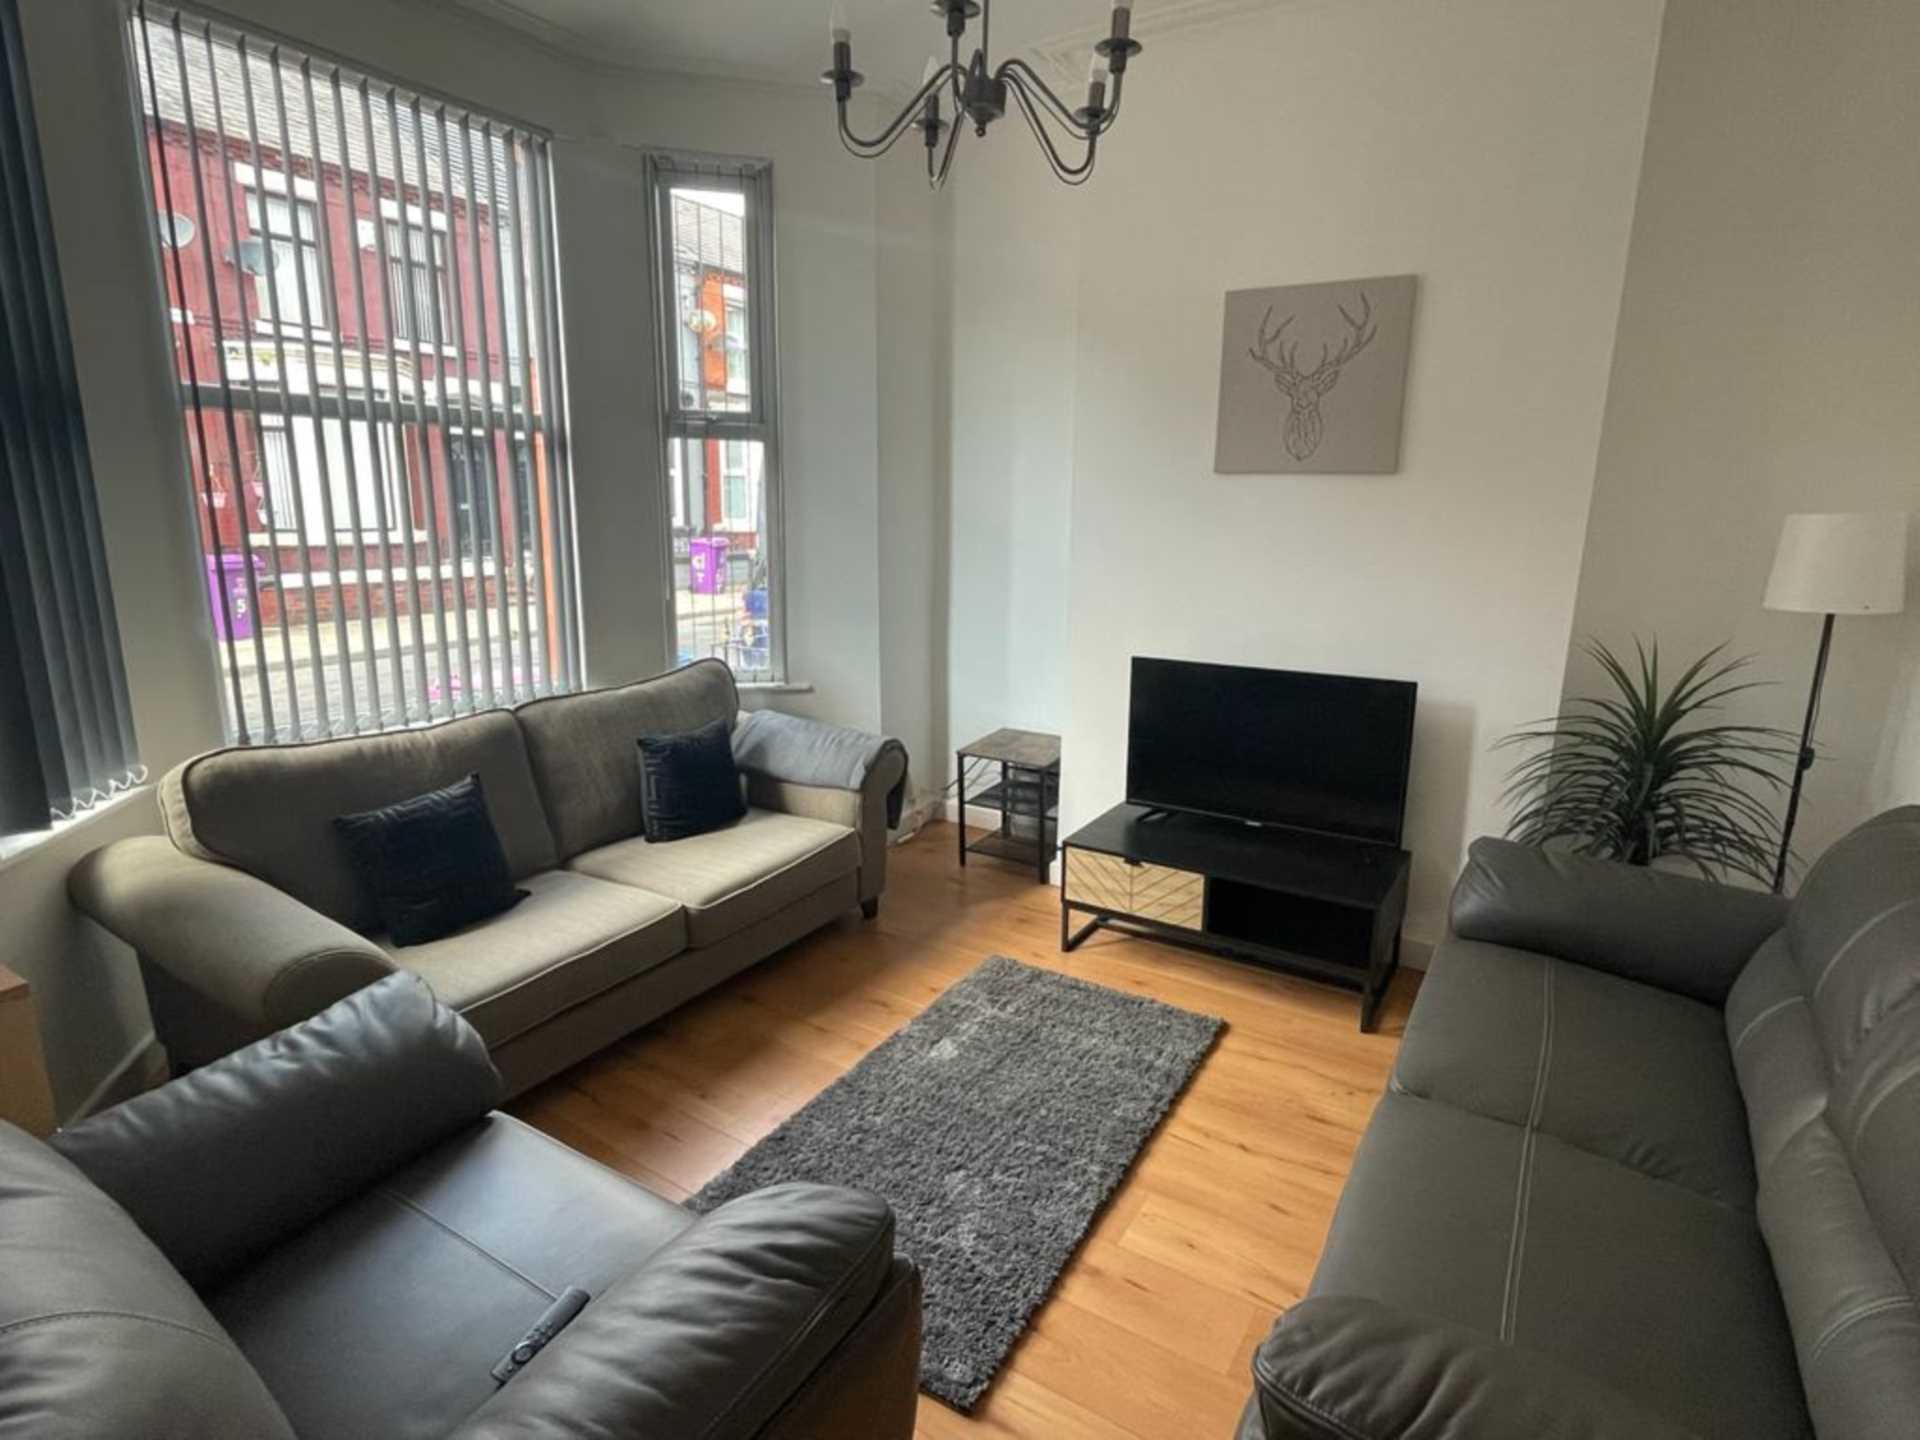 Thornycroft Road, Wavertree - 2 ROOMS AVAILABLE - STUDENTS/PROFESSIONALS, Image 2